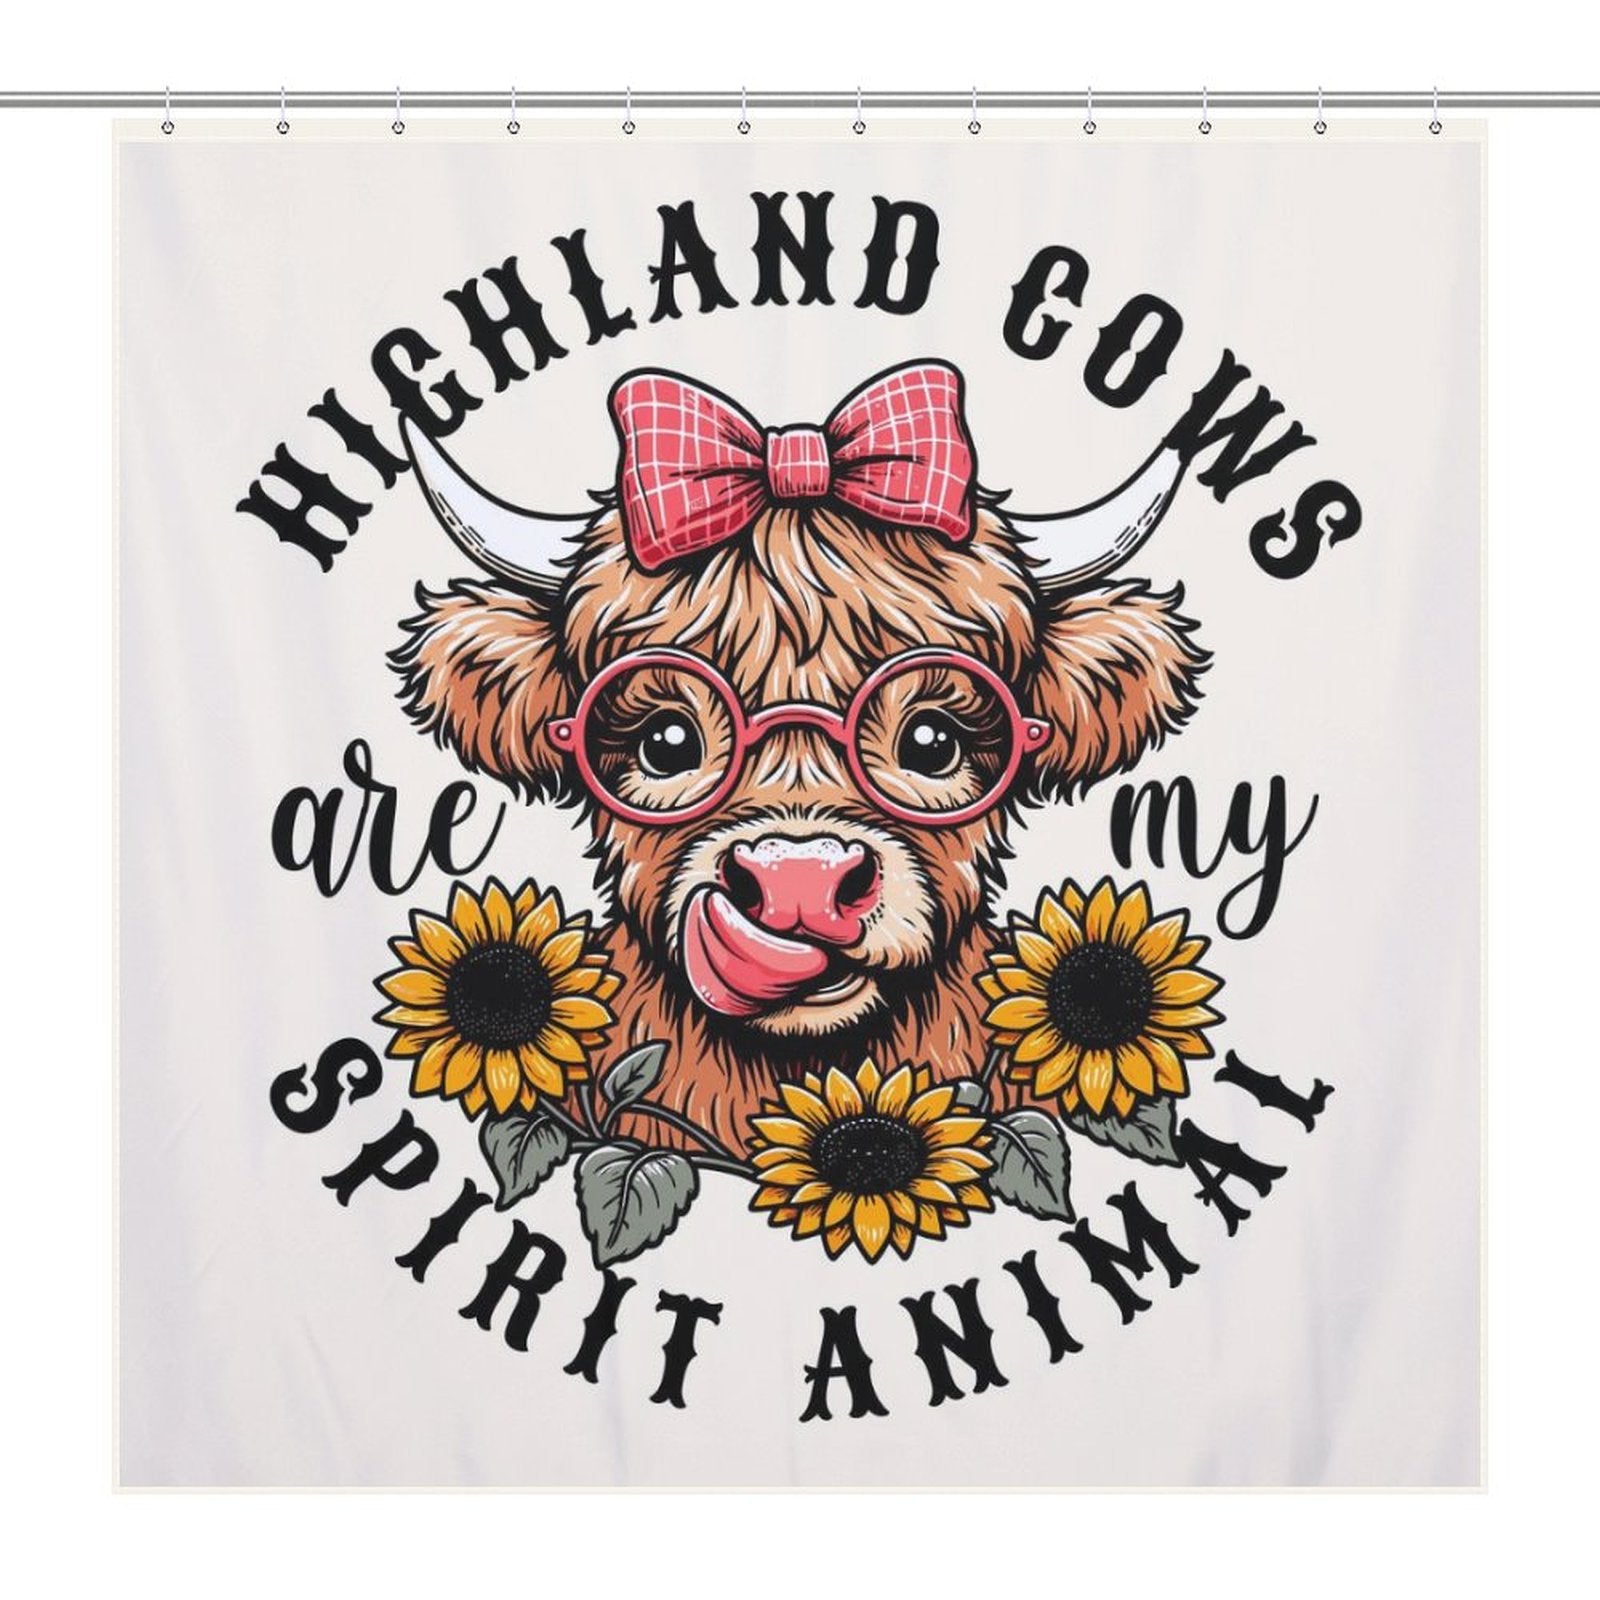 Highland cow shower curtain featuring a cute illustration of a Highland cow wearing glasses and a bow, surrounded by sunflowers, with the text "Highland cows are my spirit animal is now available as the Cute Sunflower Glasses Highland Cow Shower Curtain-Cottoncat by Cotton Cat.